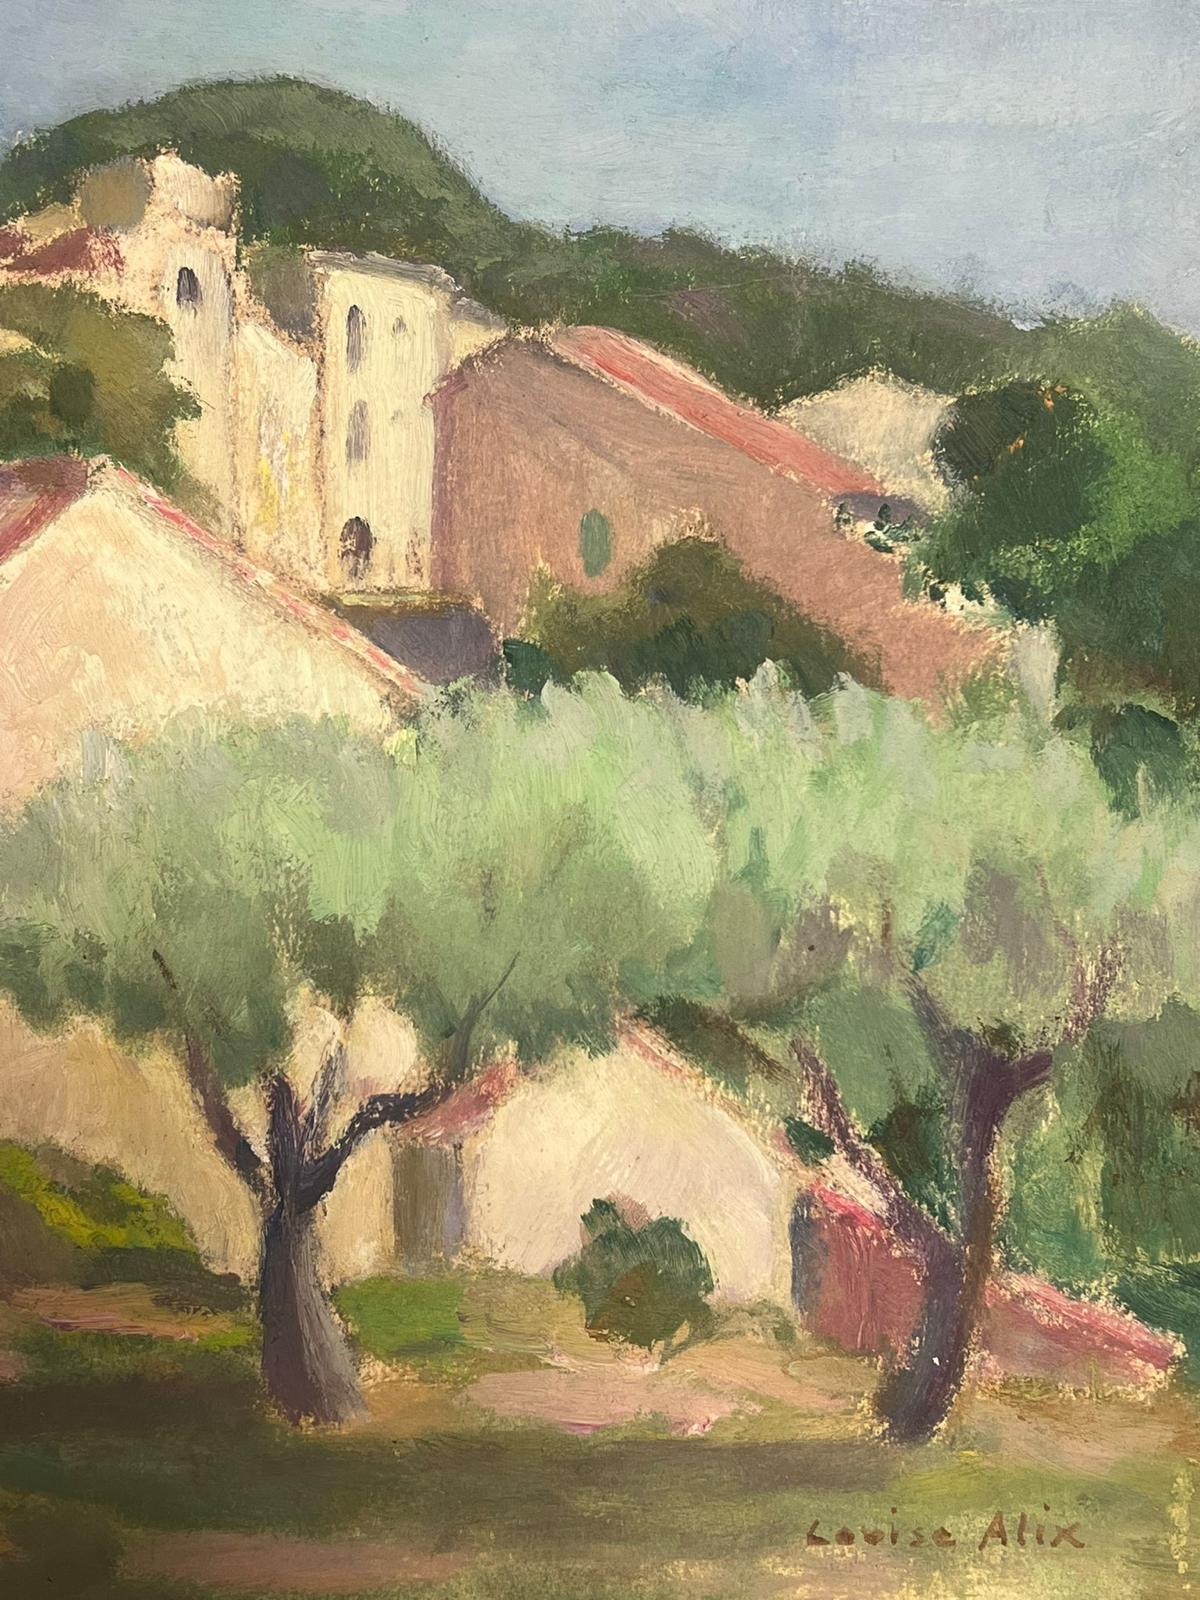 French Landscape
signed by Louise Alix (French, 1888-1980) *see notes below
oil painting on artist paper, unframed
measures: 12 inches high by 14.5 inches wide
condition: overall very good and sound, with the edges retaining an unfinished sketchy